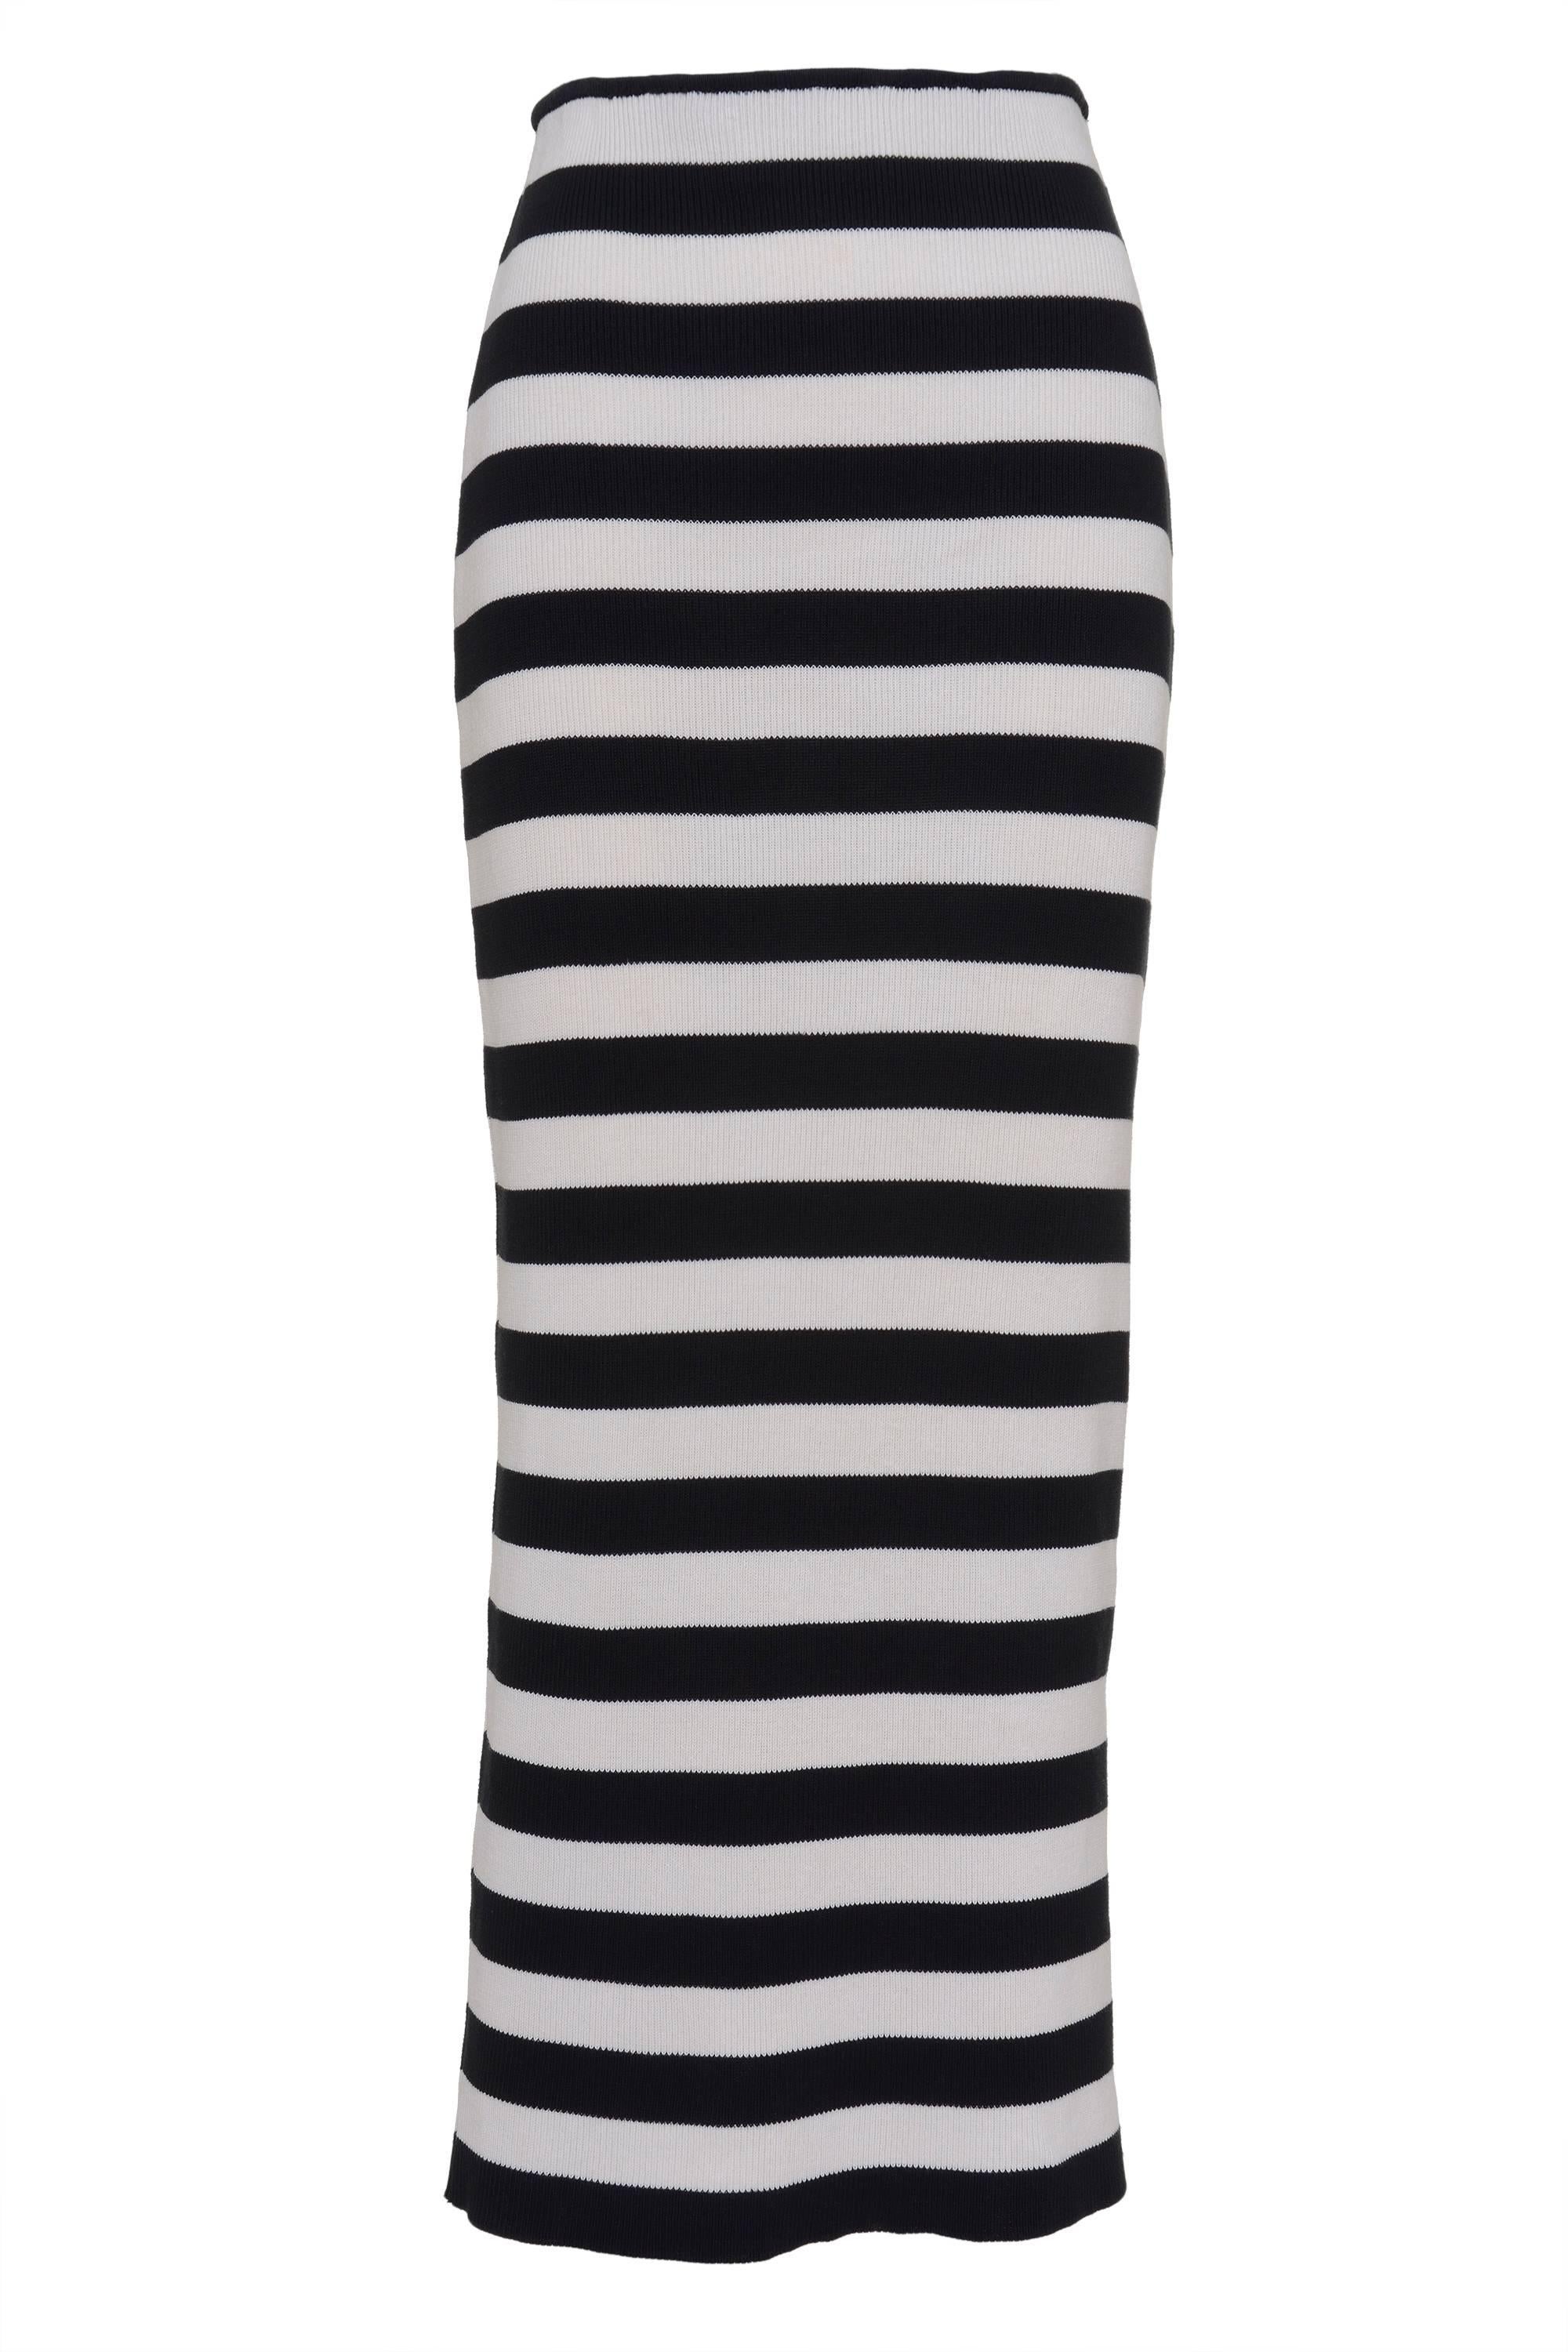 Gray Salvatore Ferragamo Striped Black and White Jersey Sweater and Skirt For Sale